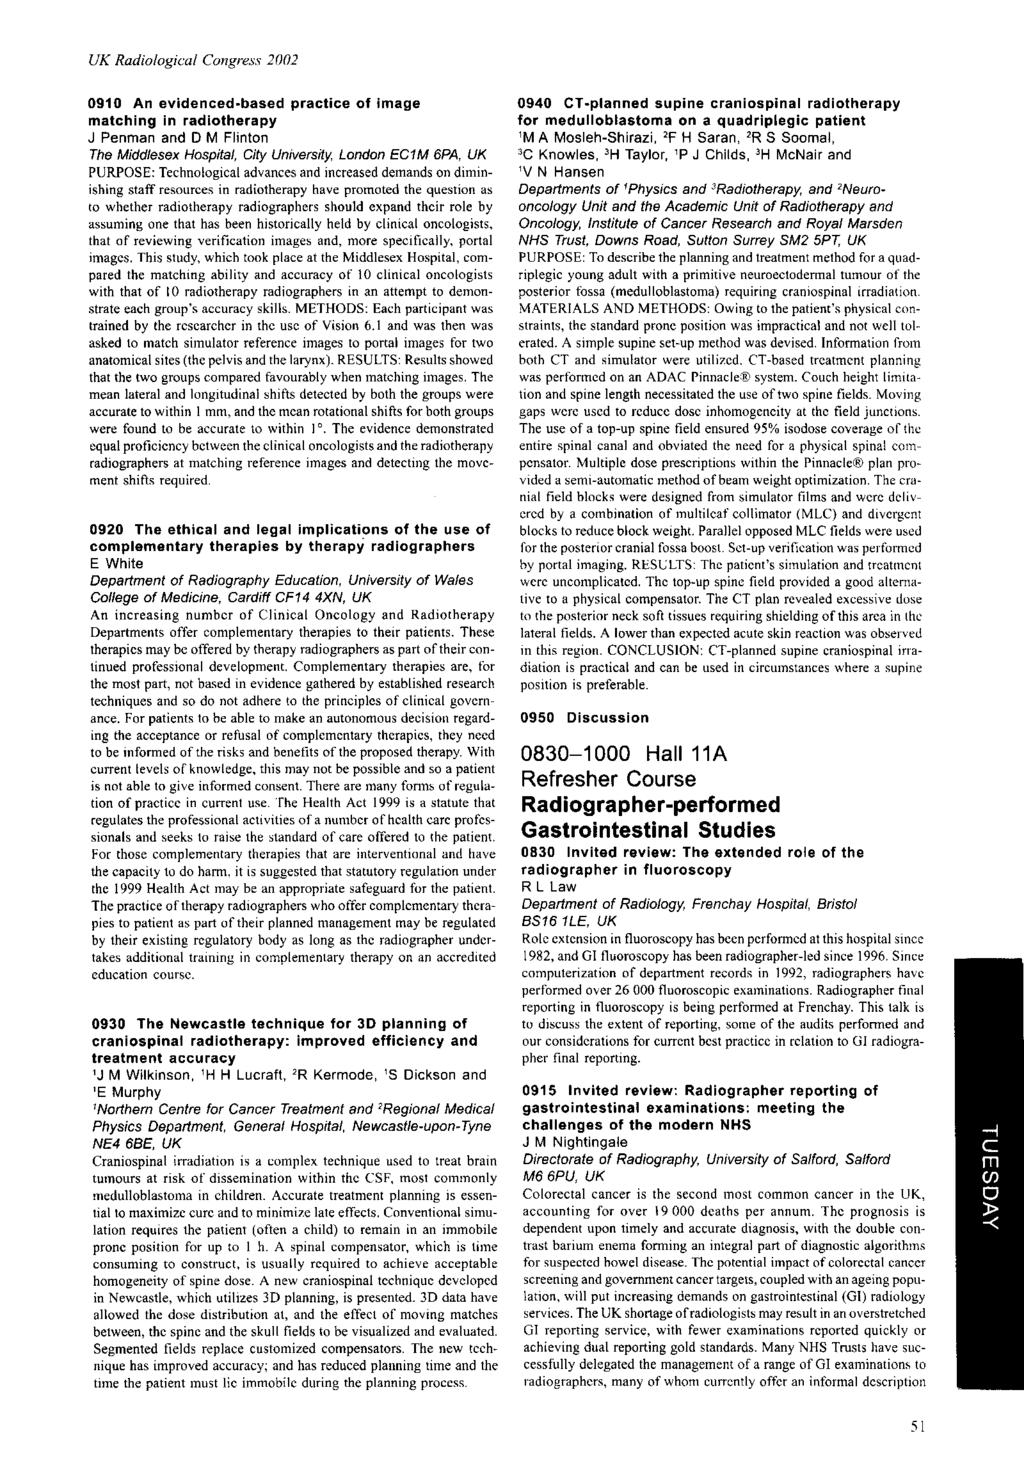 090 An evidenced-based practice of image matching in radiotherapy J Penman and D M Flinton The Middlesex Hospital, City University, London ECM 6PA, UK PURPOSE: Technological advances and increased